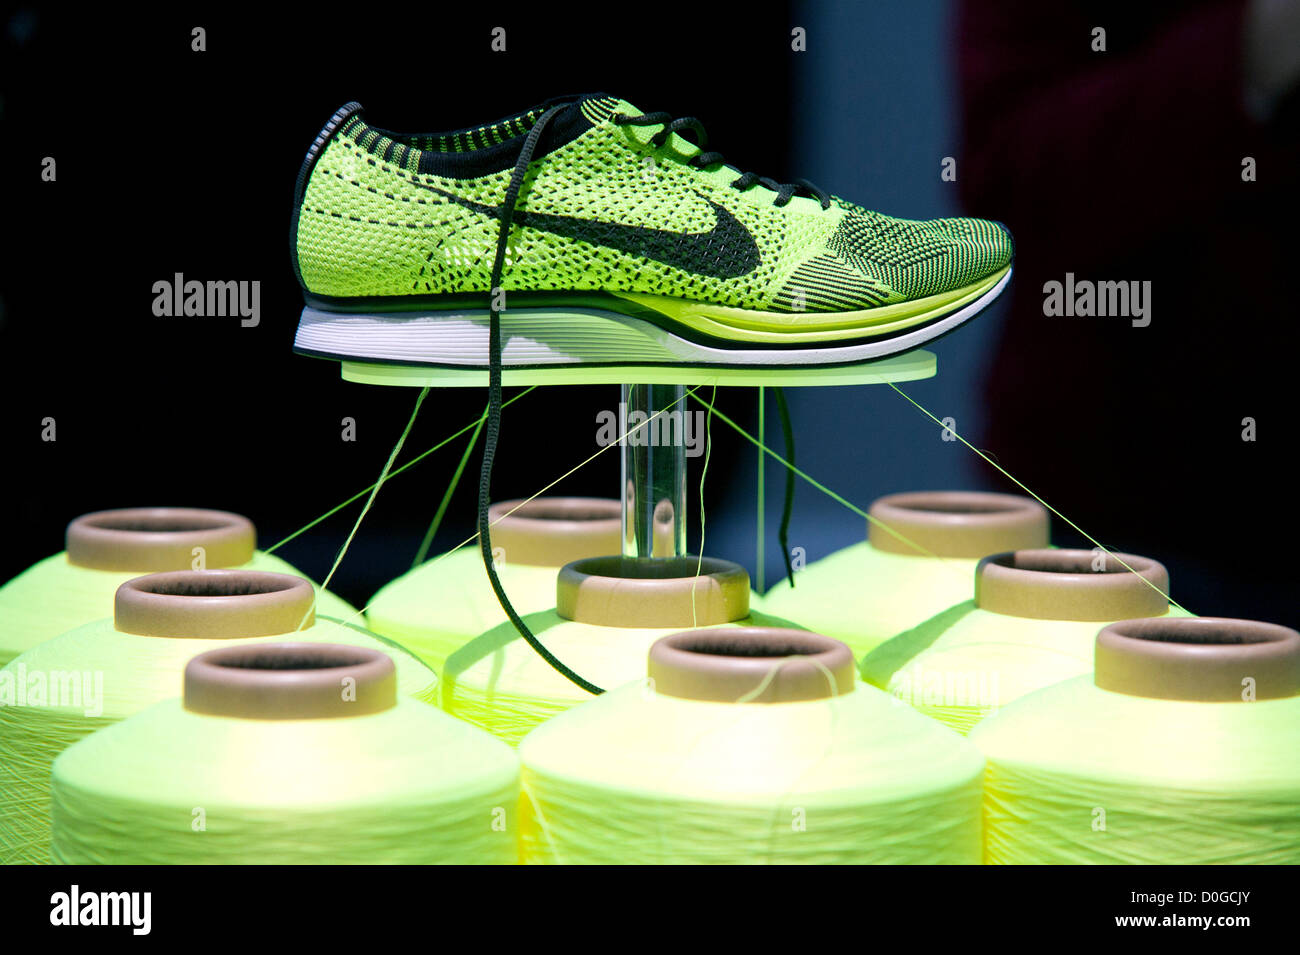 November 25, 2012, Tokyo, Japan - The new technology of running shoe Nike  Flyknit Racer by Nike, Inc is selected as 